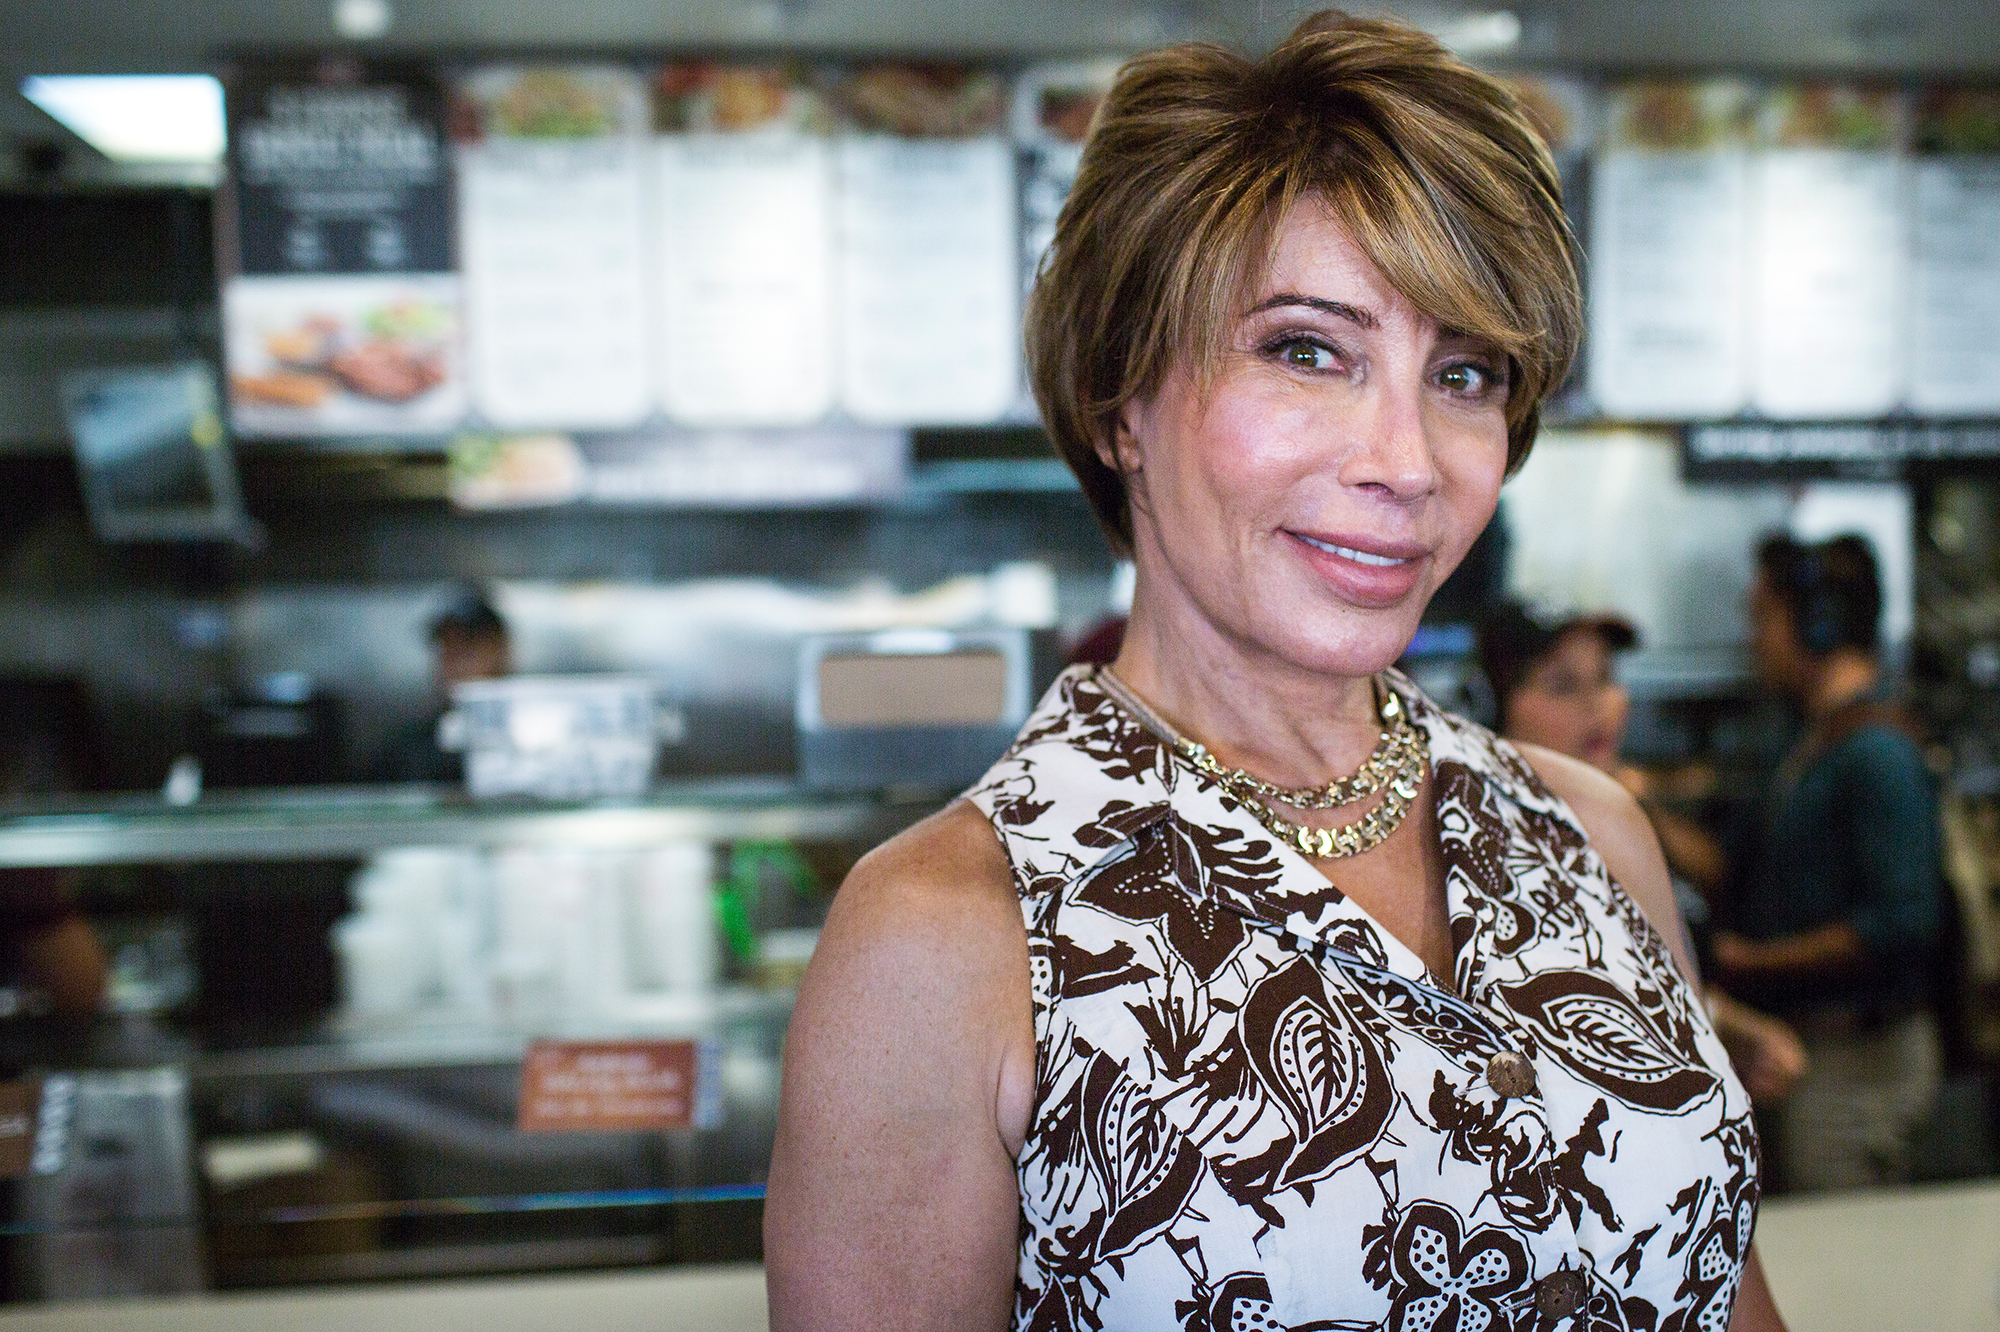 Michaela Mendelsohn is a transgender activist, public speaker and businesswoman. "The word's just gotten out that I'm a trans owner supporting trans people," she says at one of six El Pollo Loco locations she owns.